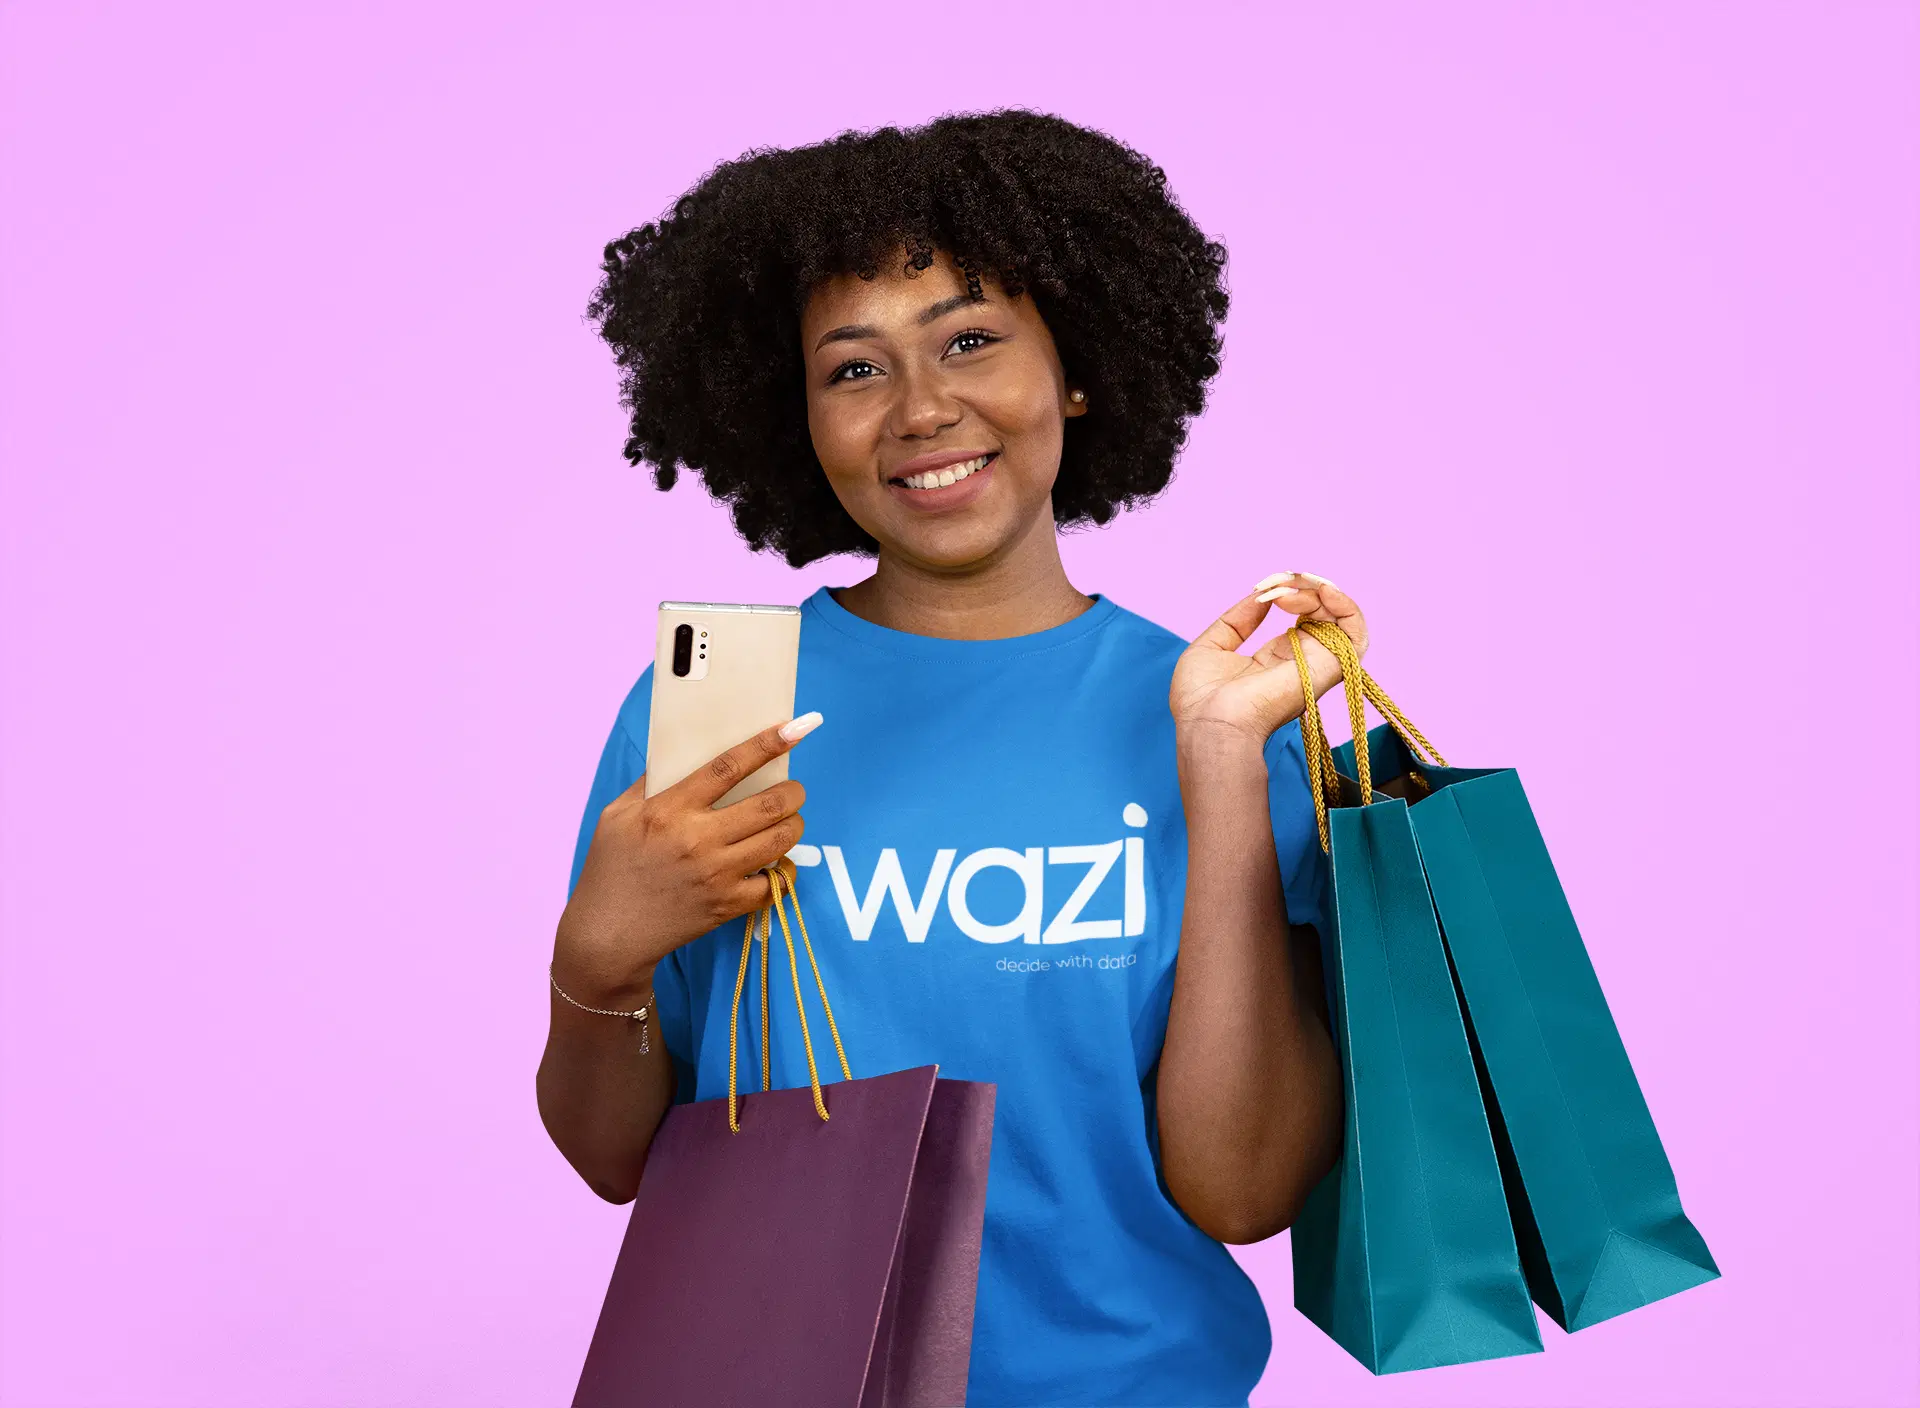 t-shirt-mockup-of-a-woman-with-afro-hair-carrying-shopping-bags-m22122-r-el2